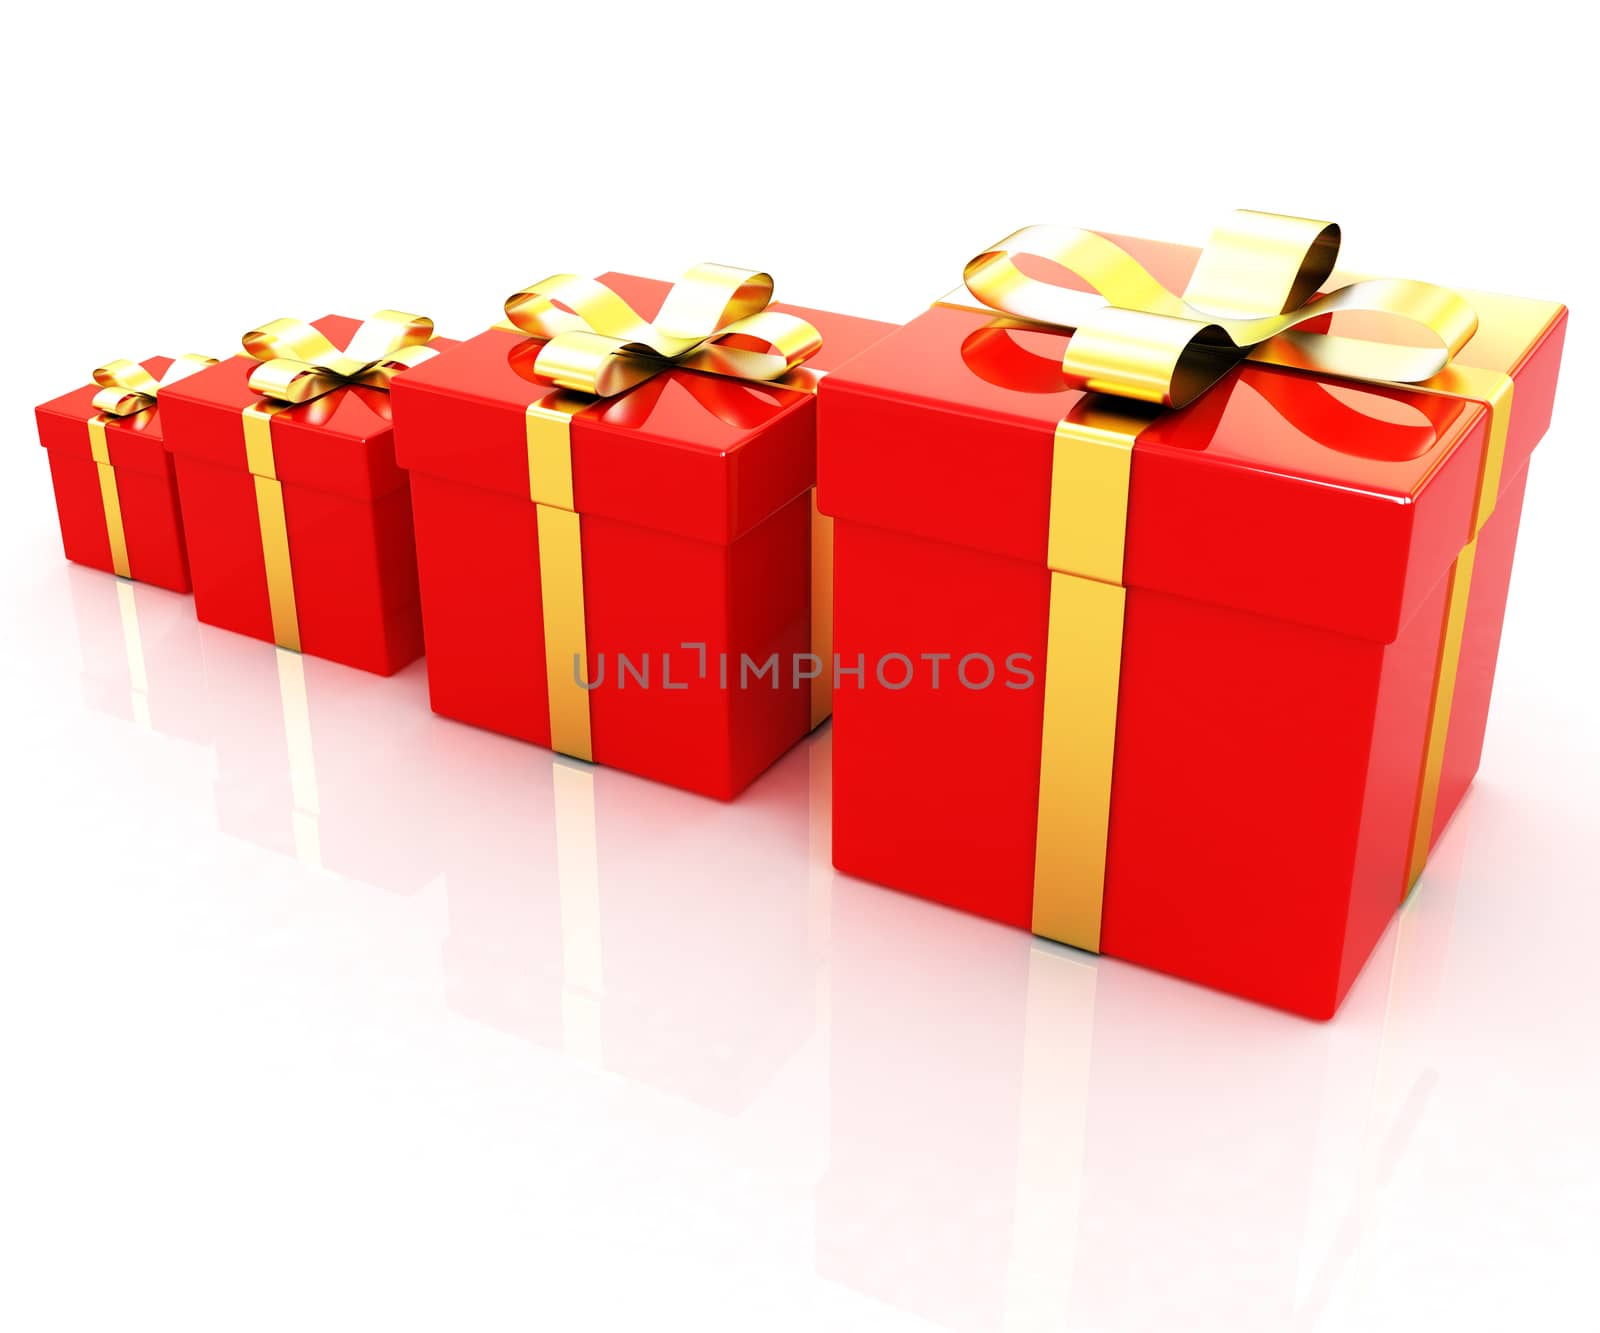 Bright christmas gifts on a white background 